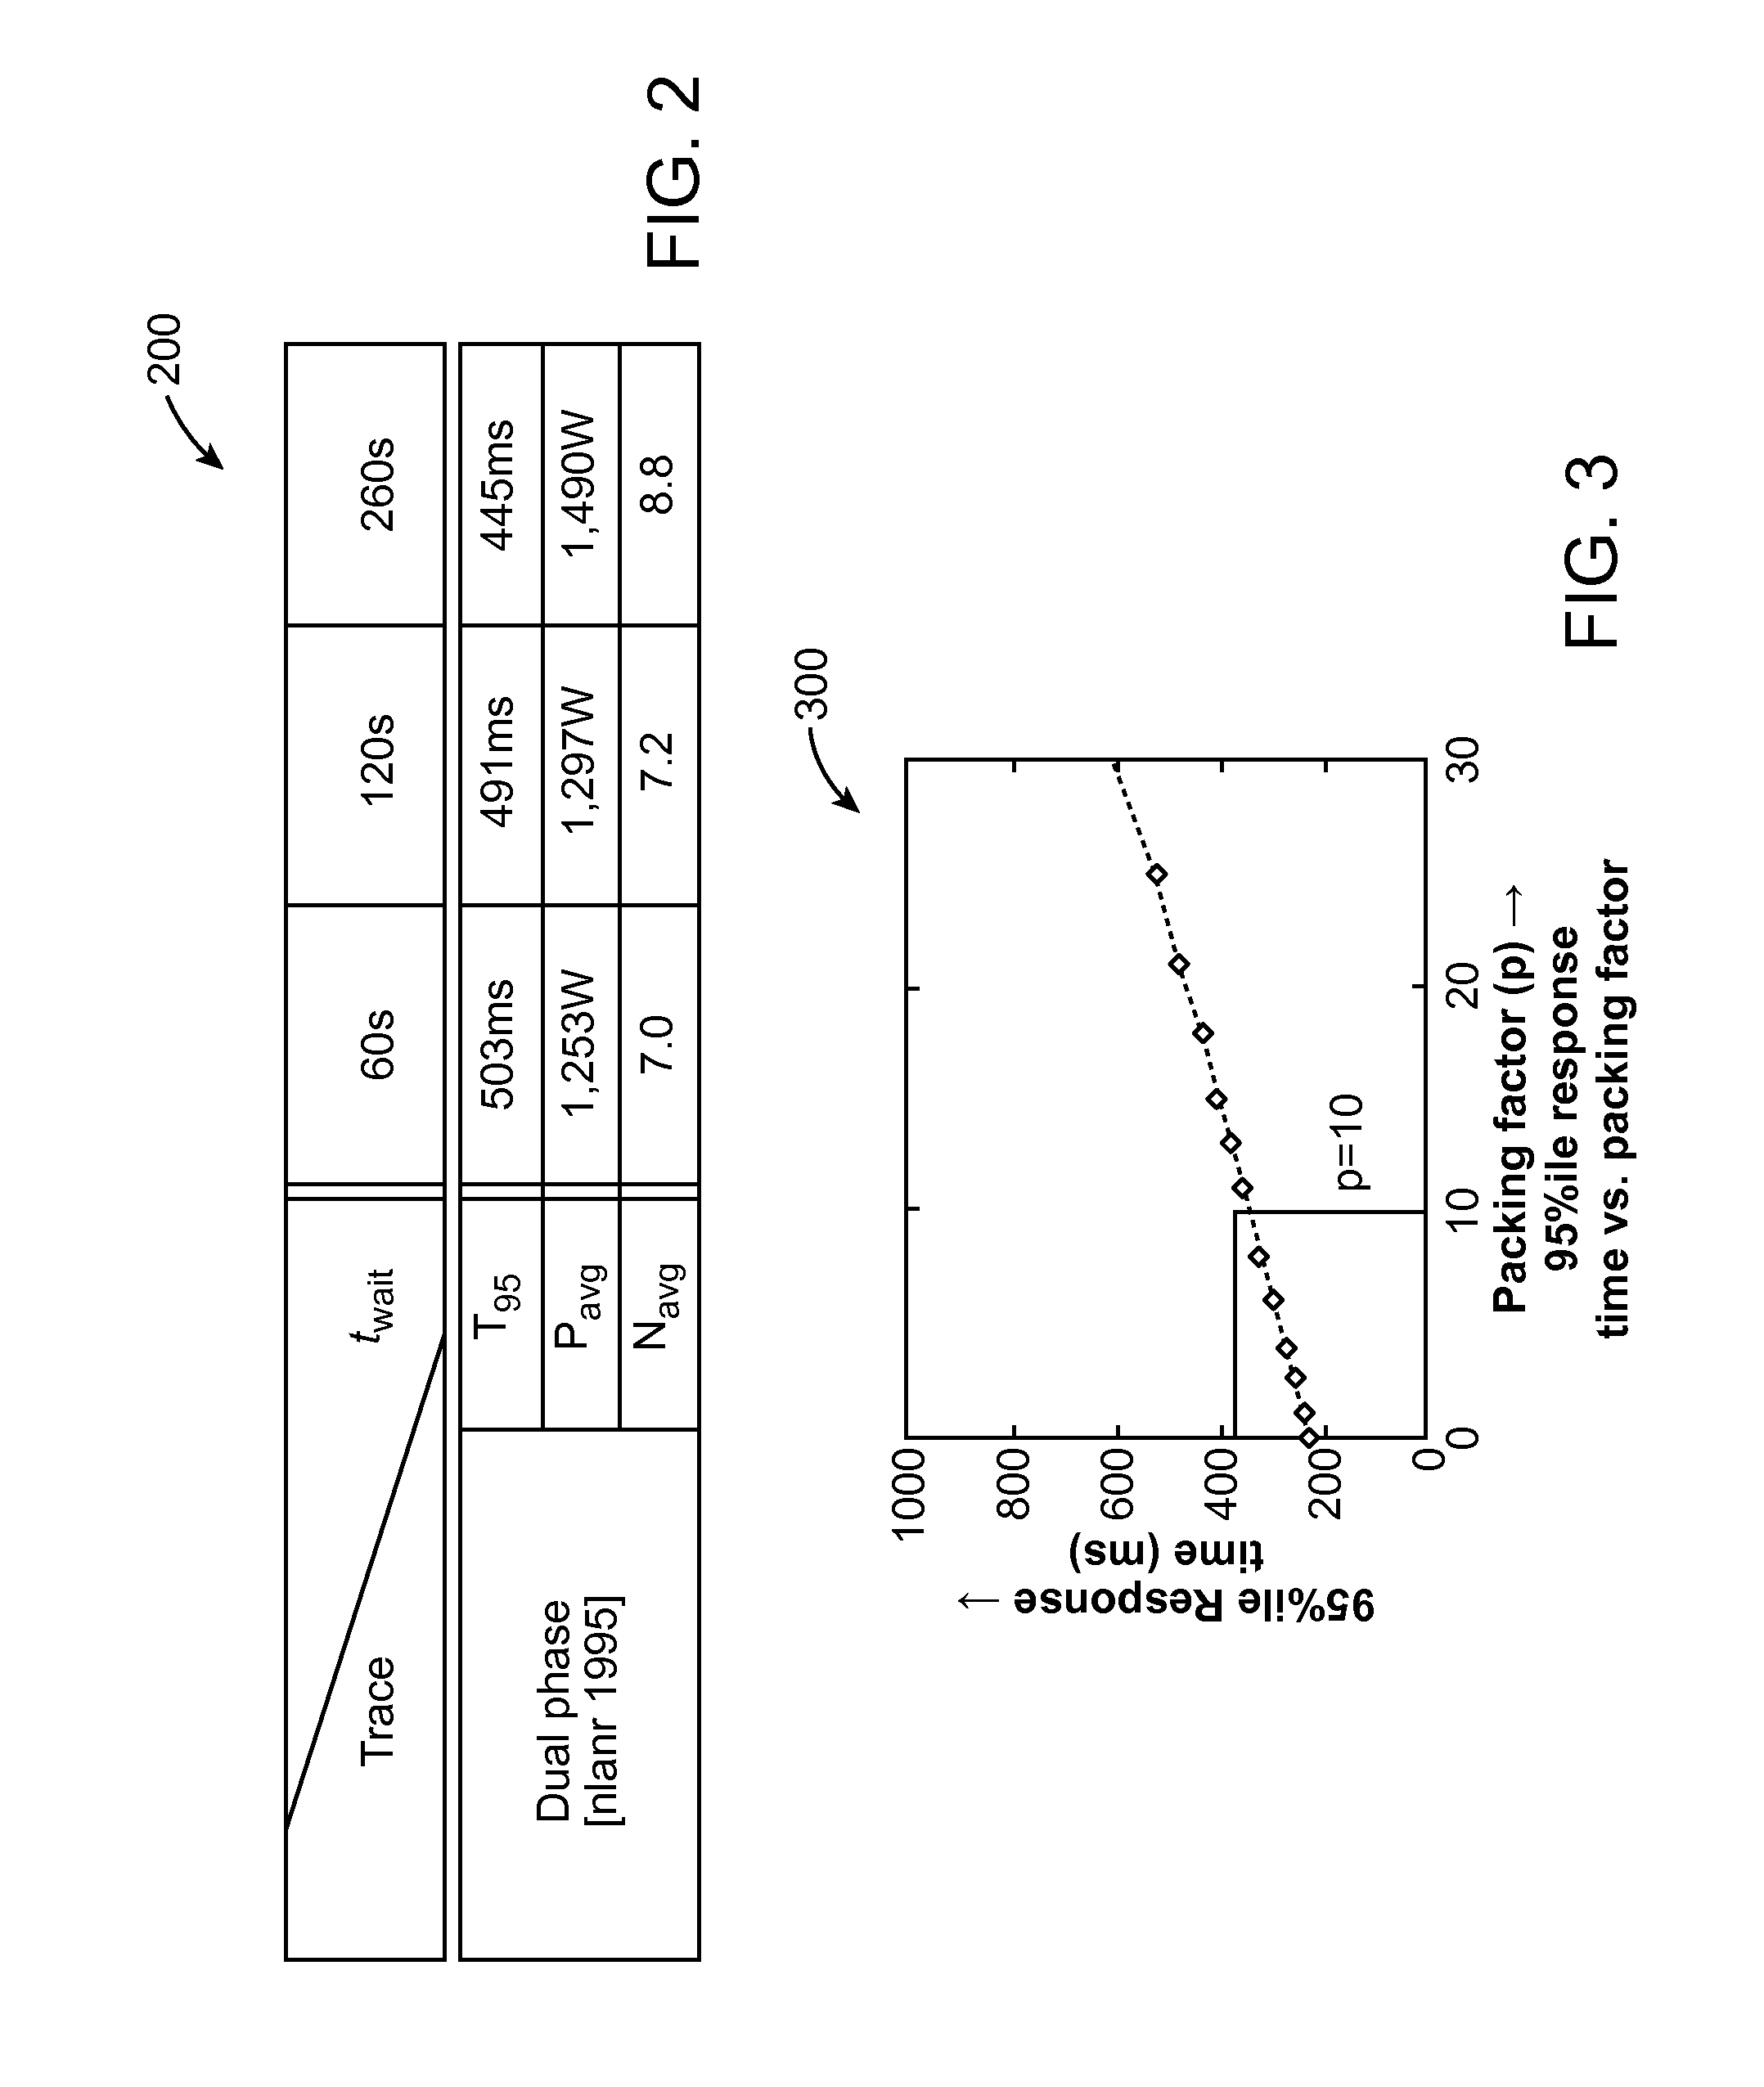 Dynamic capacity management of multiple parallel-connected computing resources